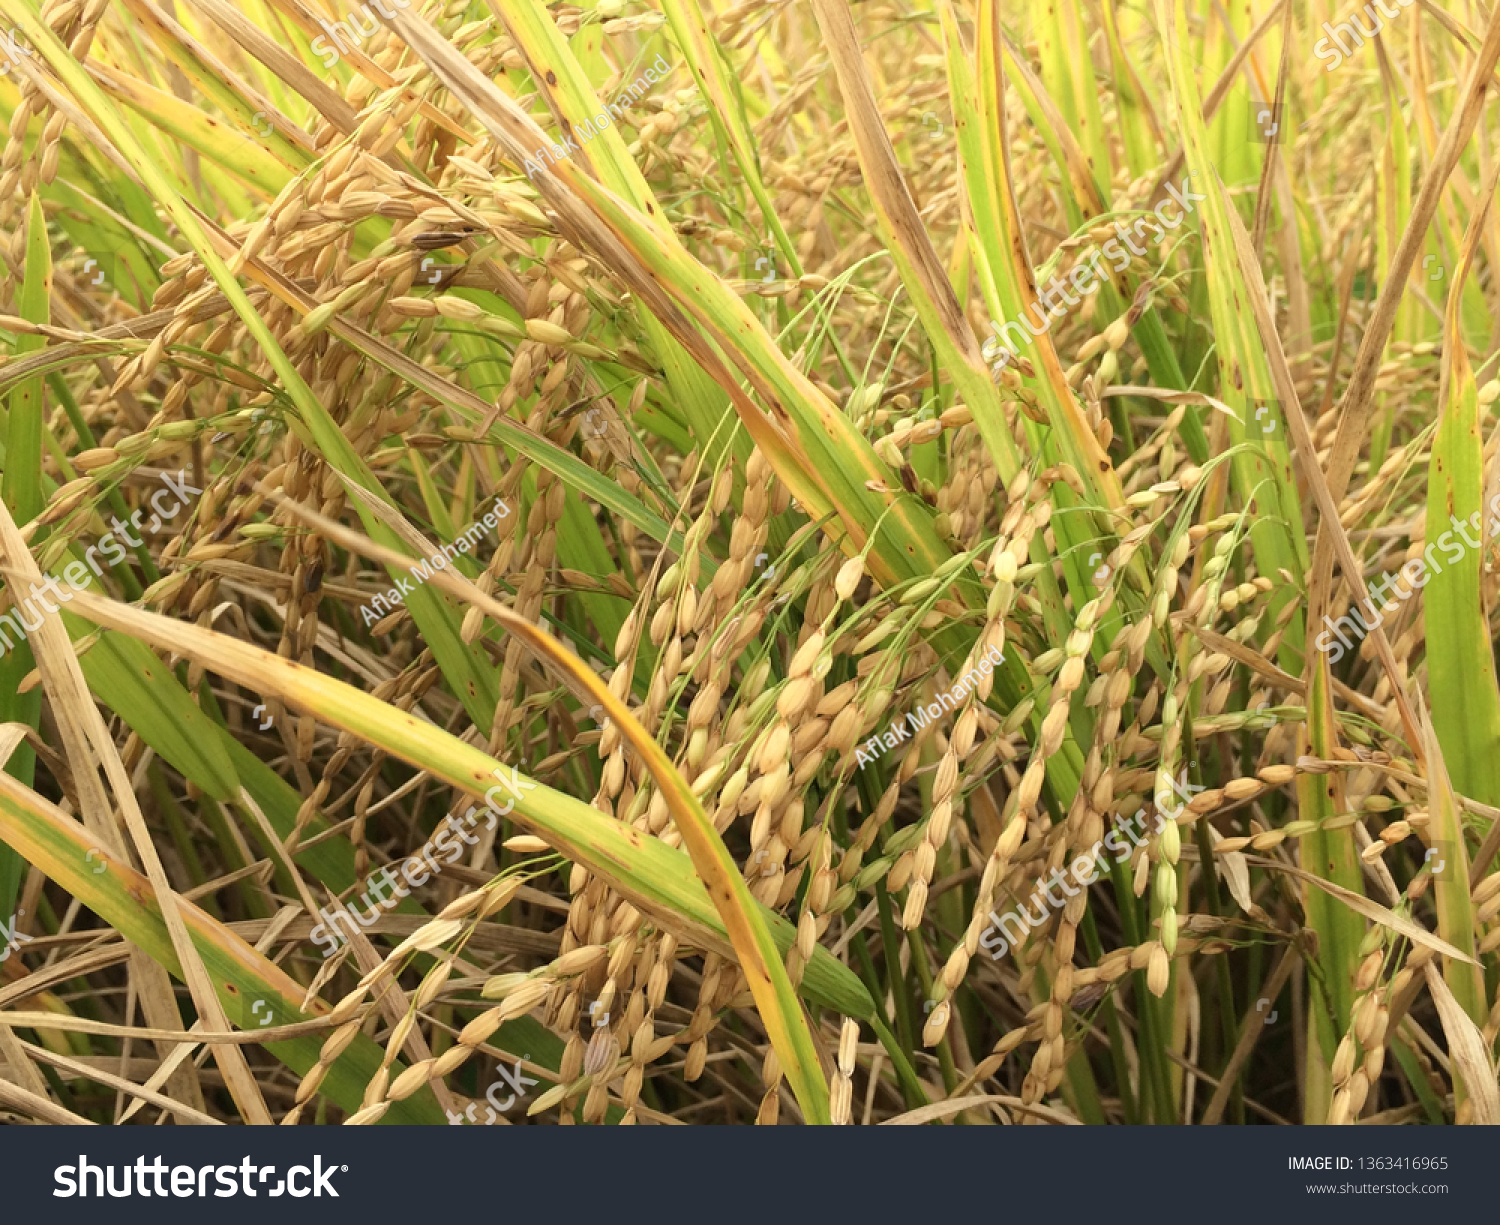 paddy sheets in paddy field #1363416965